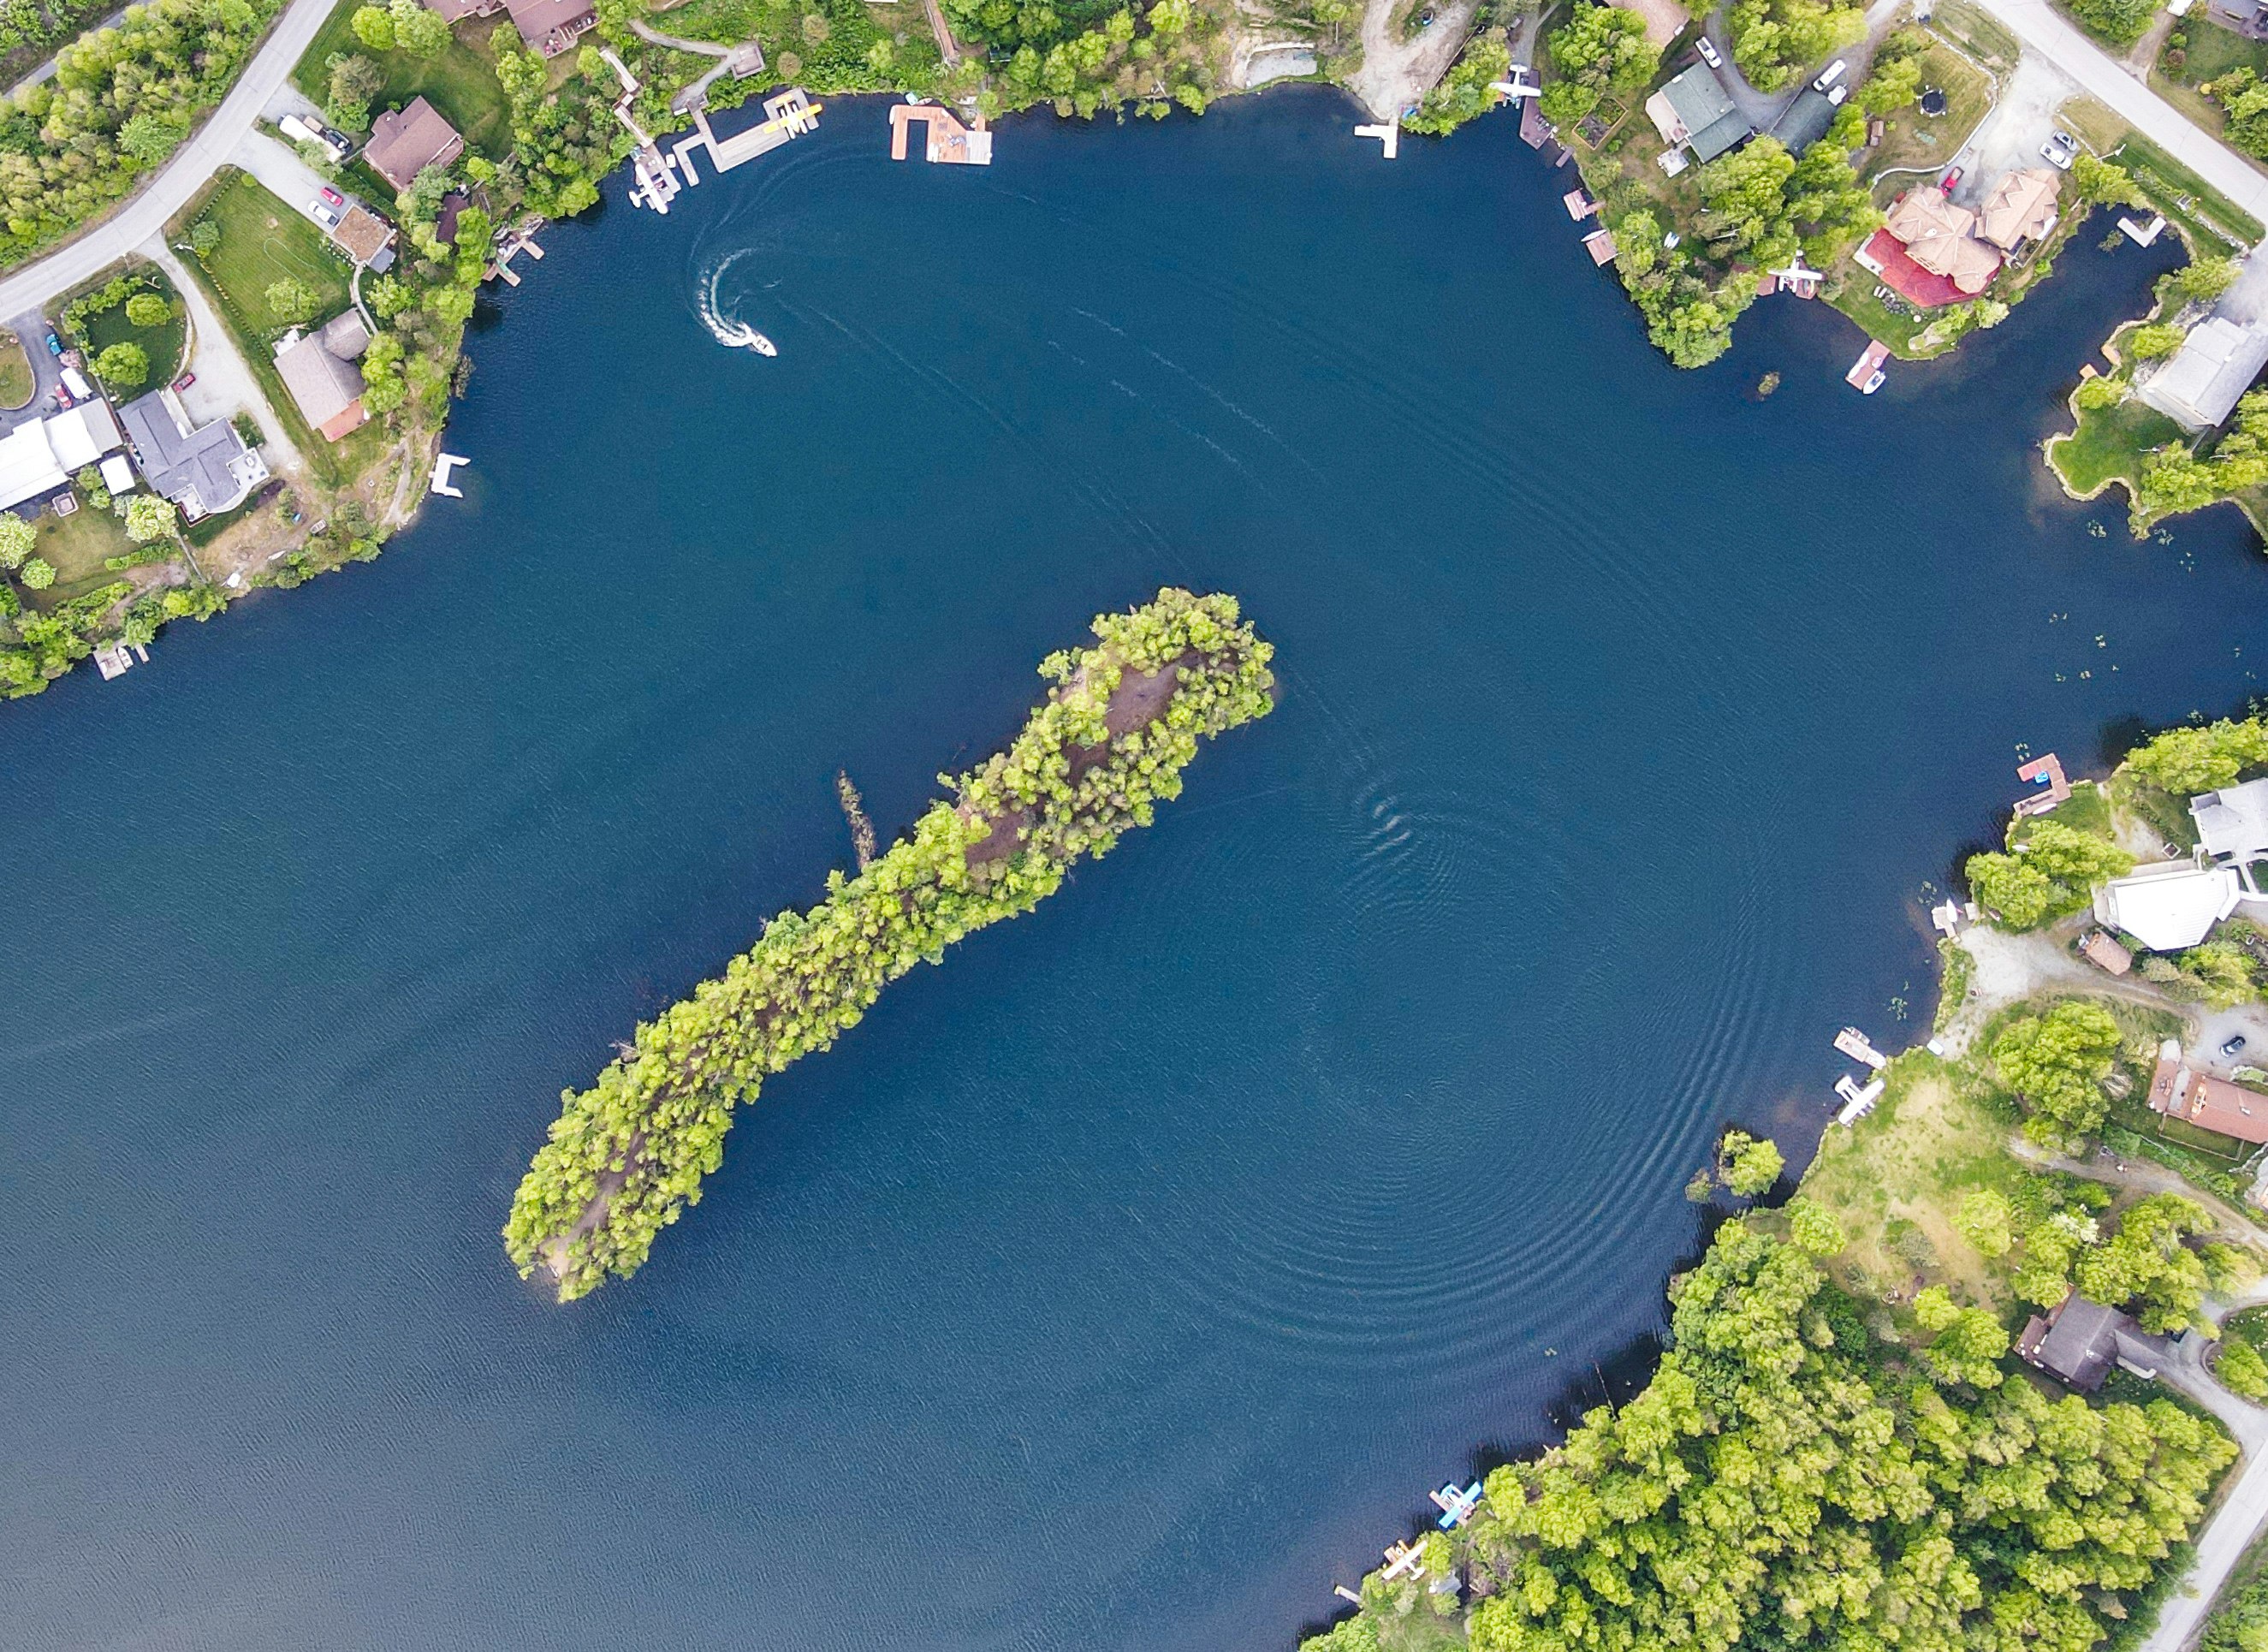 aerial view of green trees and body of water during daytime